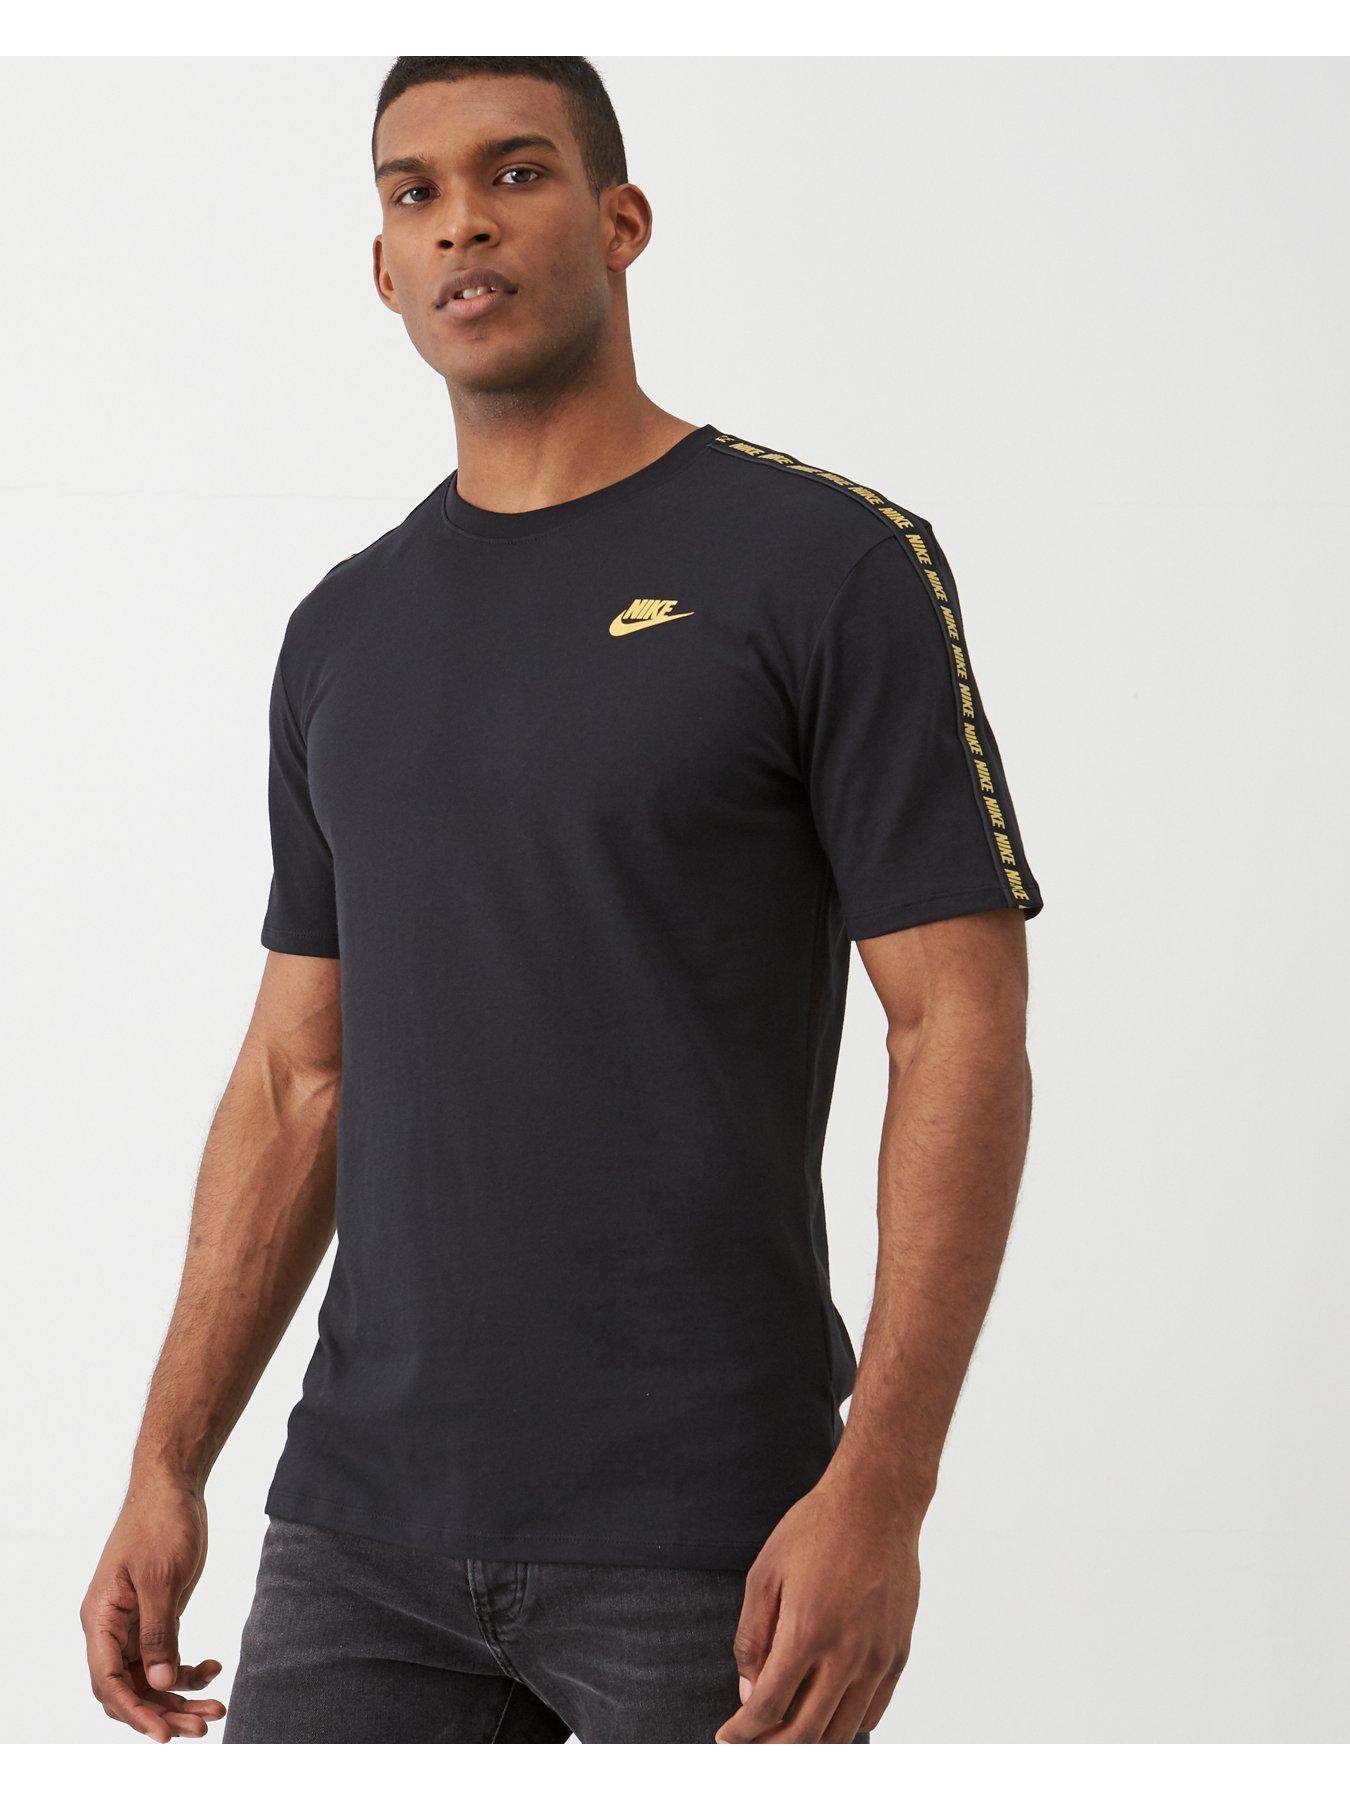 black and gold nike t shirt 